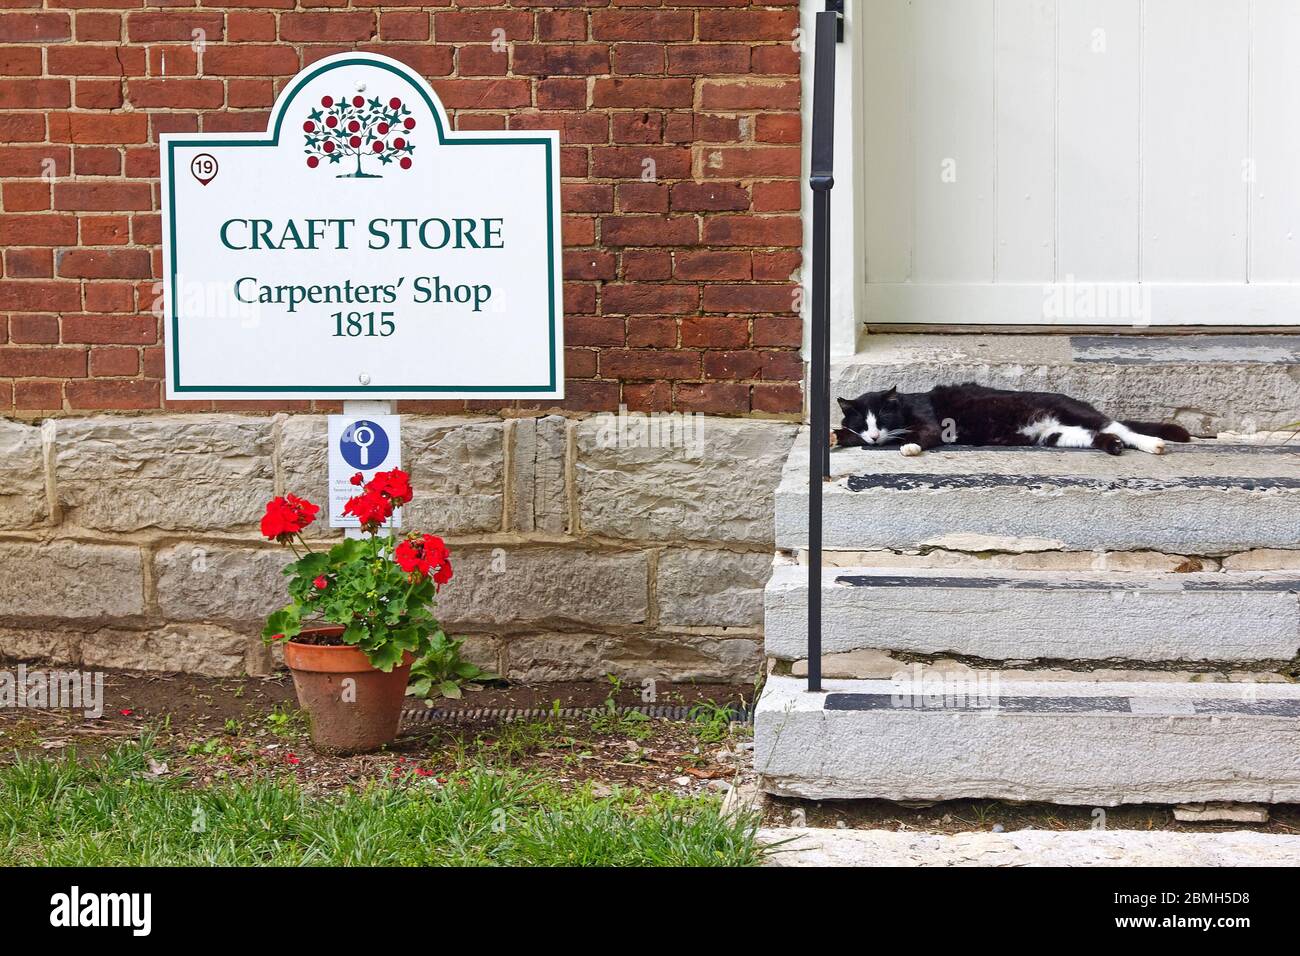 Craft Store, Carpenters' Shop building; 1815, black cat on step, potted red geranium, brick, stone, old; Shaker Village of Pleasant Hill; defunct reli Stock Photo